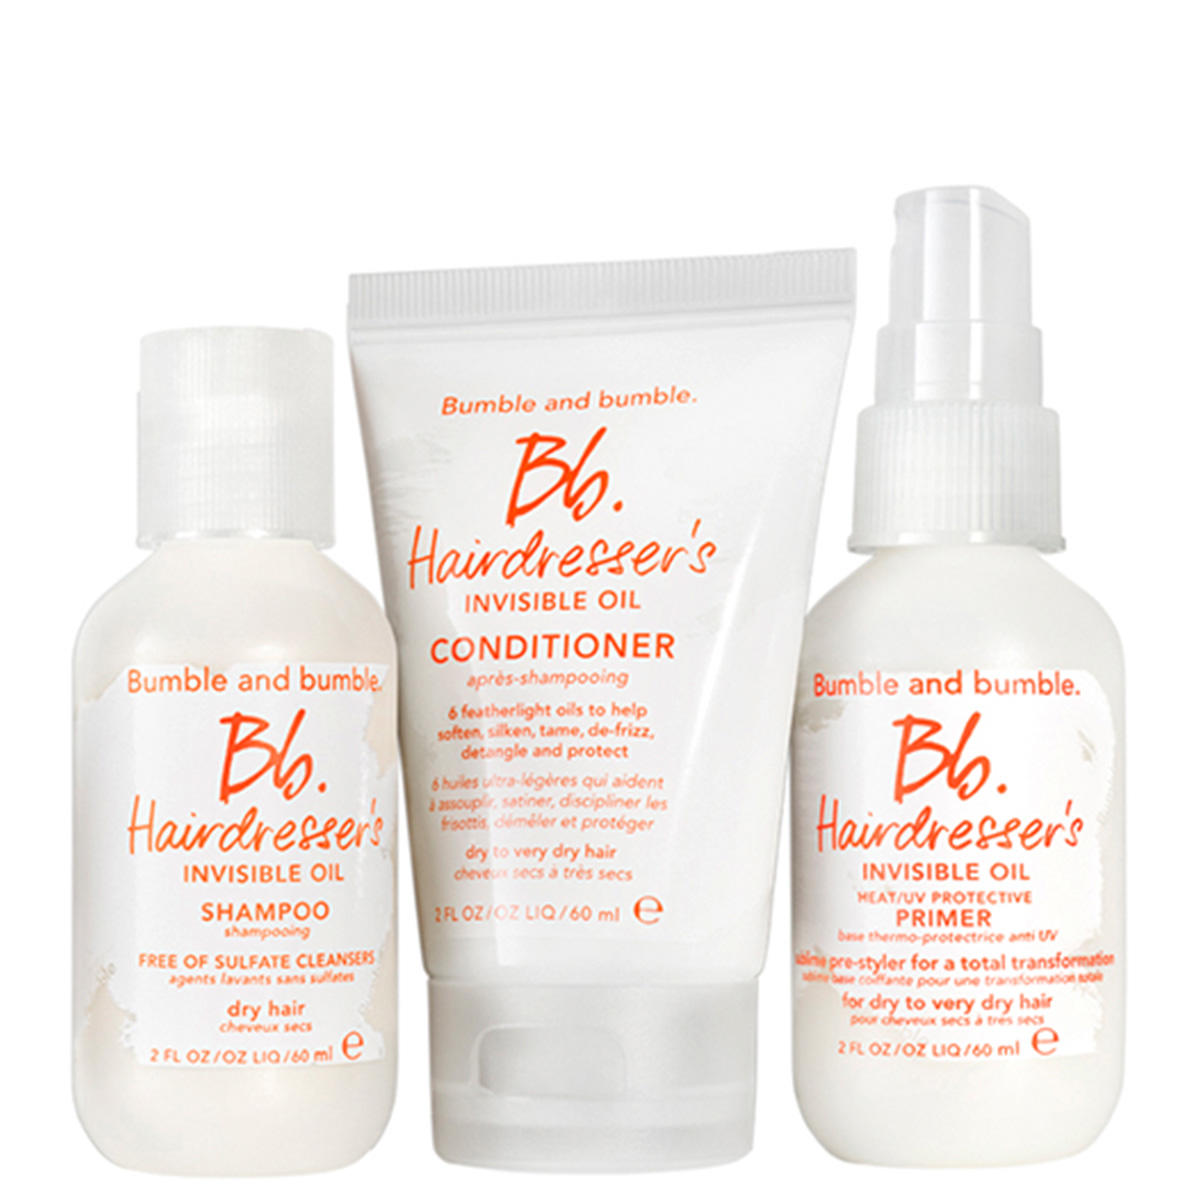 Bumble and bumble Hairdresser’s Oil Trial Set  - 3